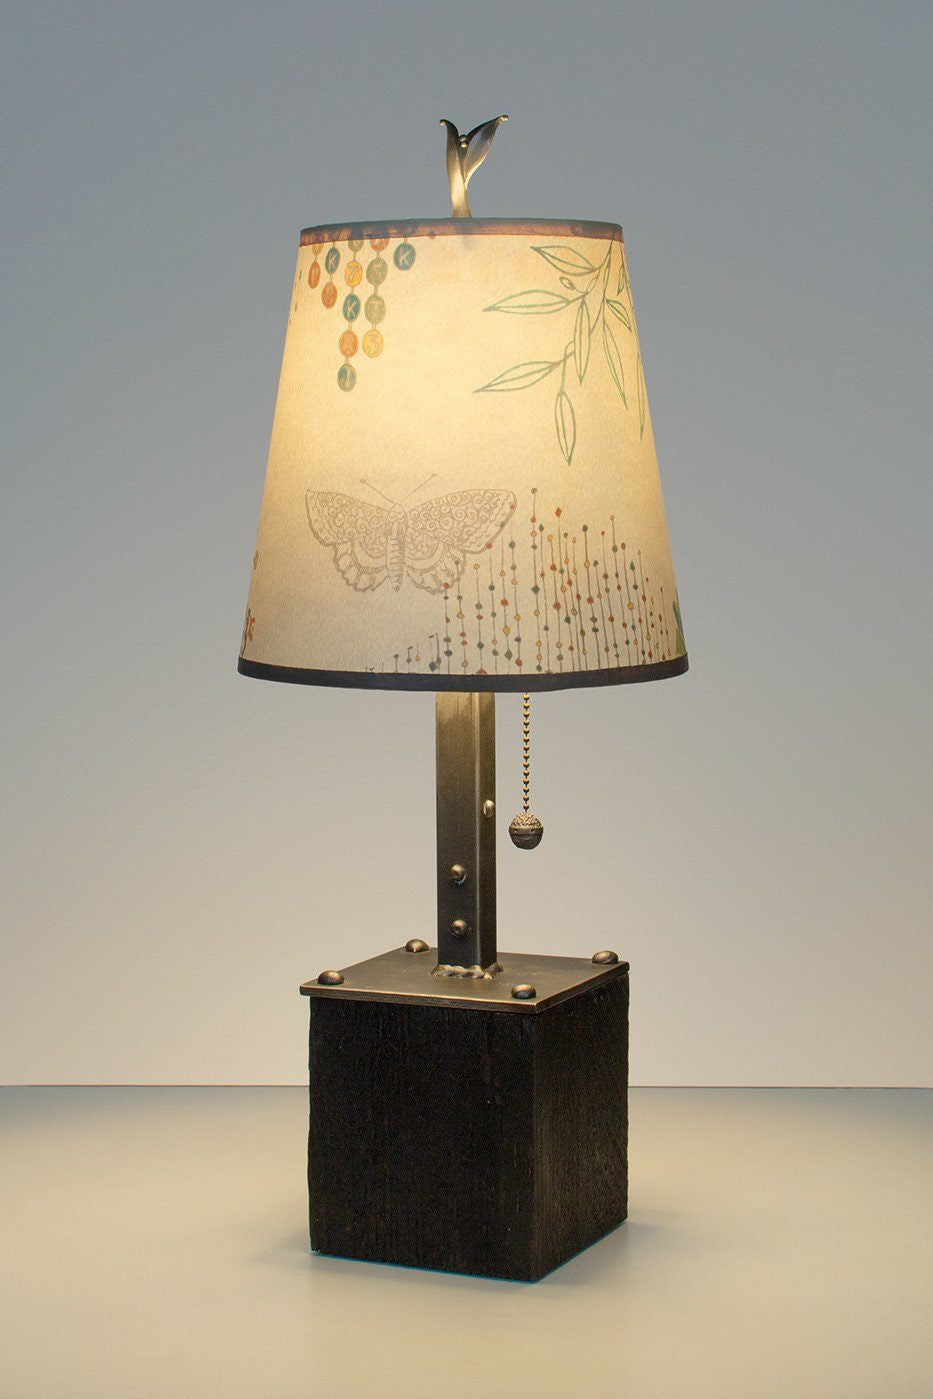 Steel Table Lamp on Reclaimed Wood with Small Drum Shade in Ecru Journey Lit